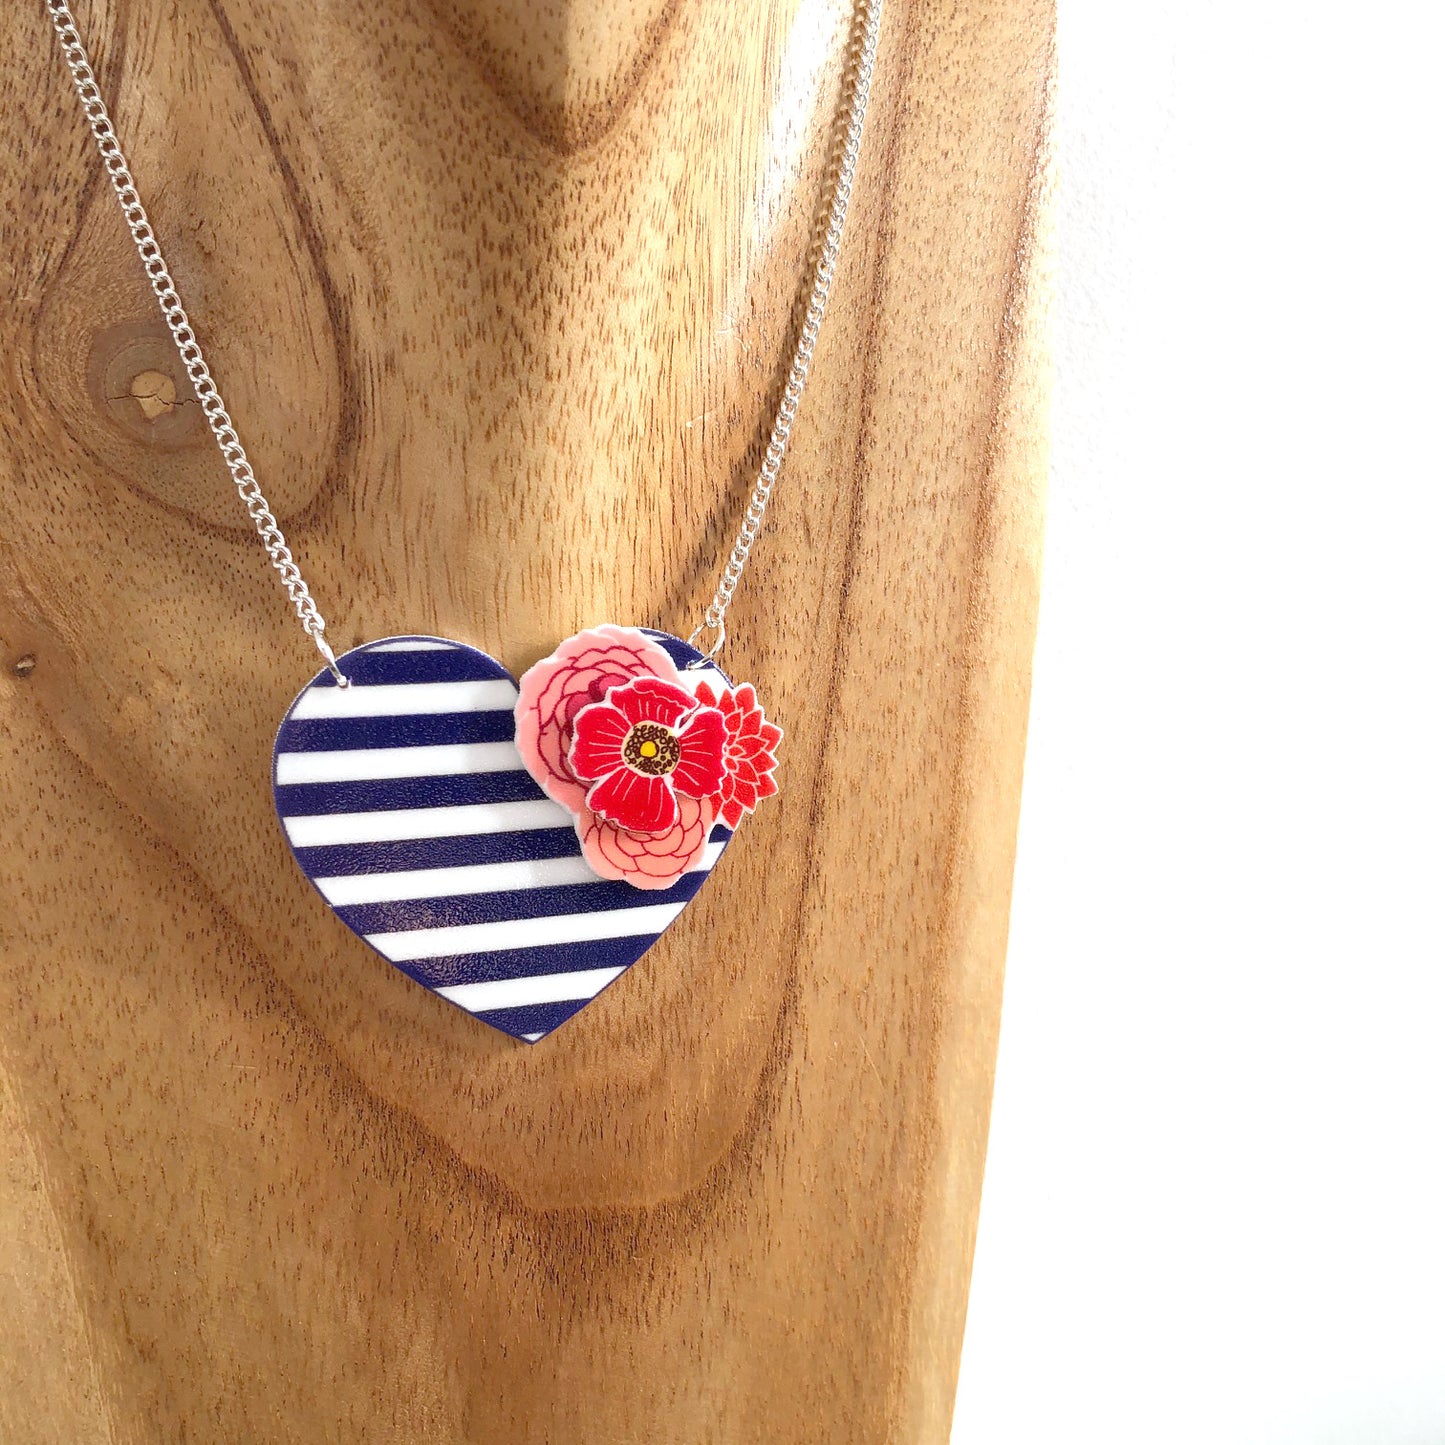 Navy nautical heart necklace - Stripes and flowers - Valentine gift for her